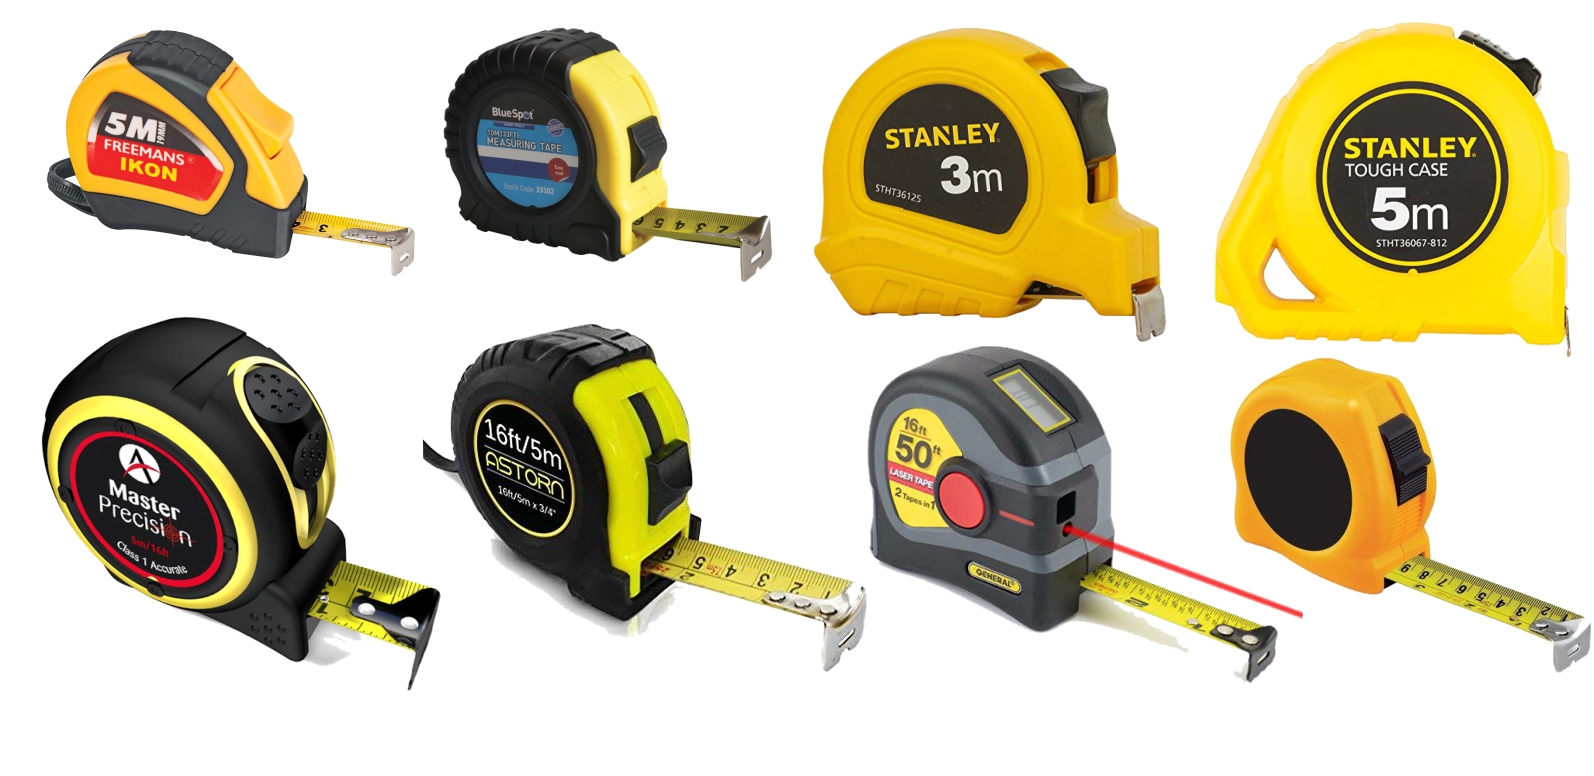 Buy Best Measuring Tapes Online at Best Price in India,Toolswala